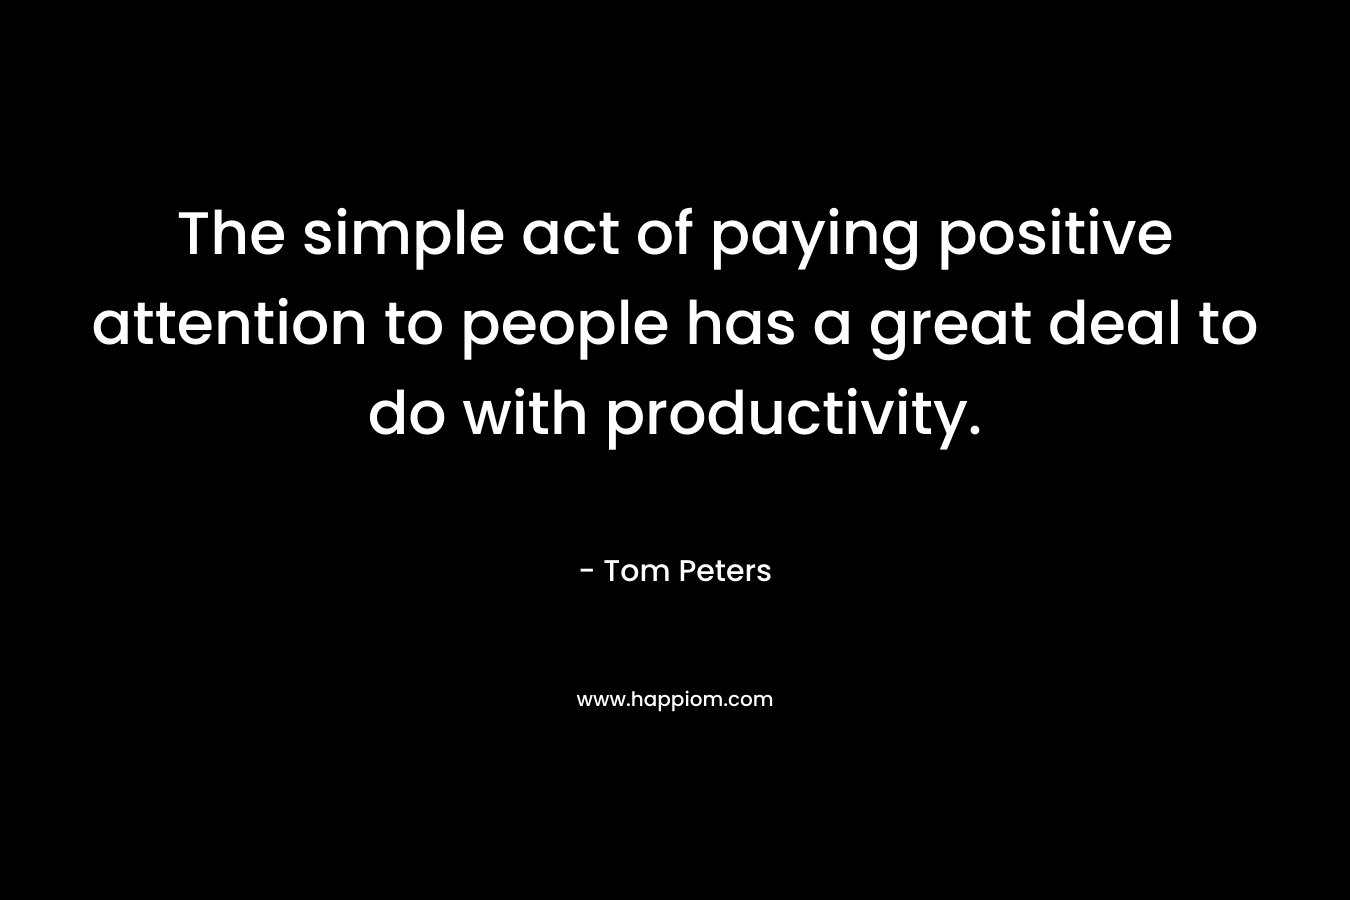 The simple act of paying positive attention to people has a great deal to do with productivity. – Tom Peters